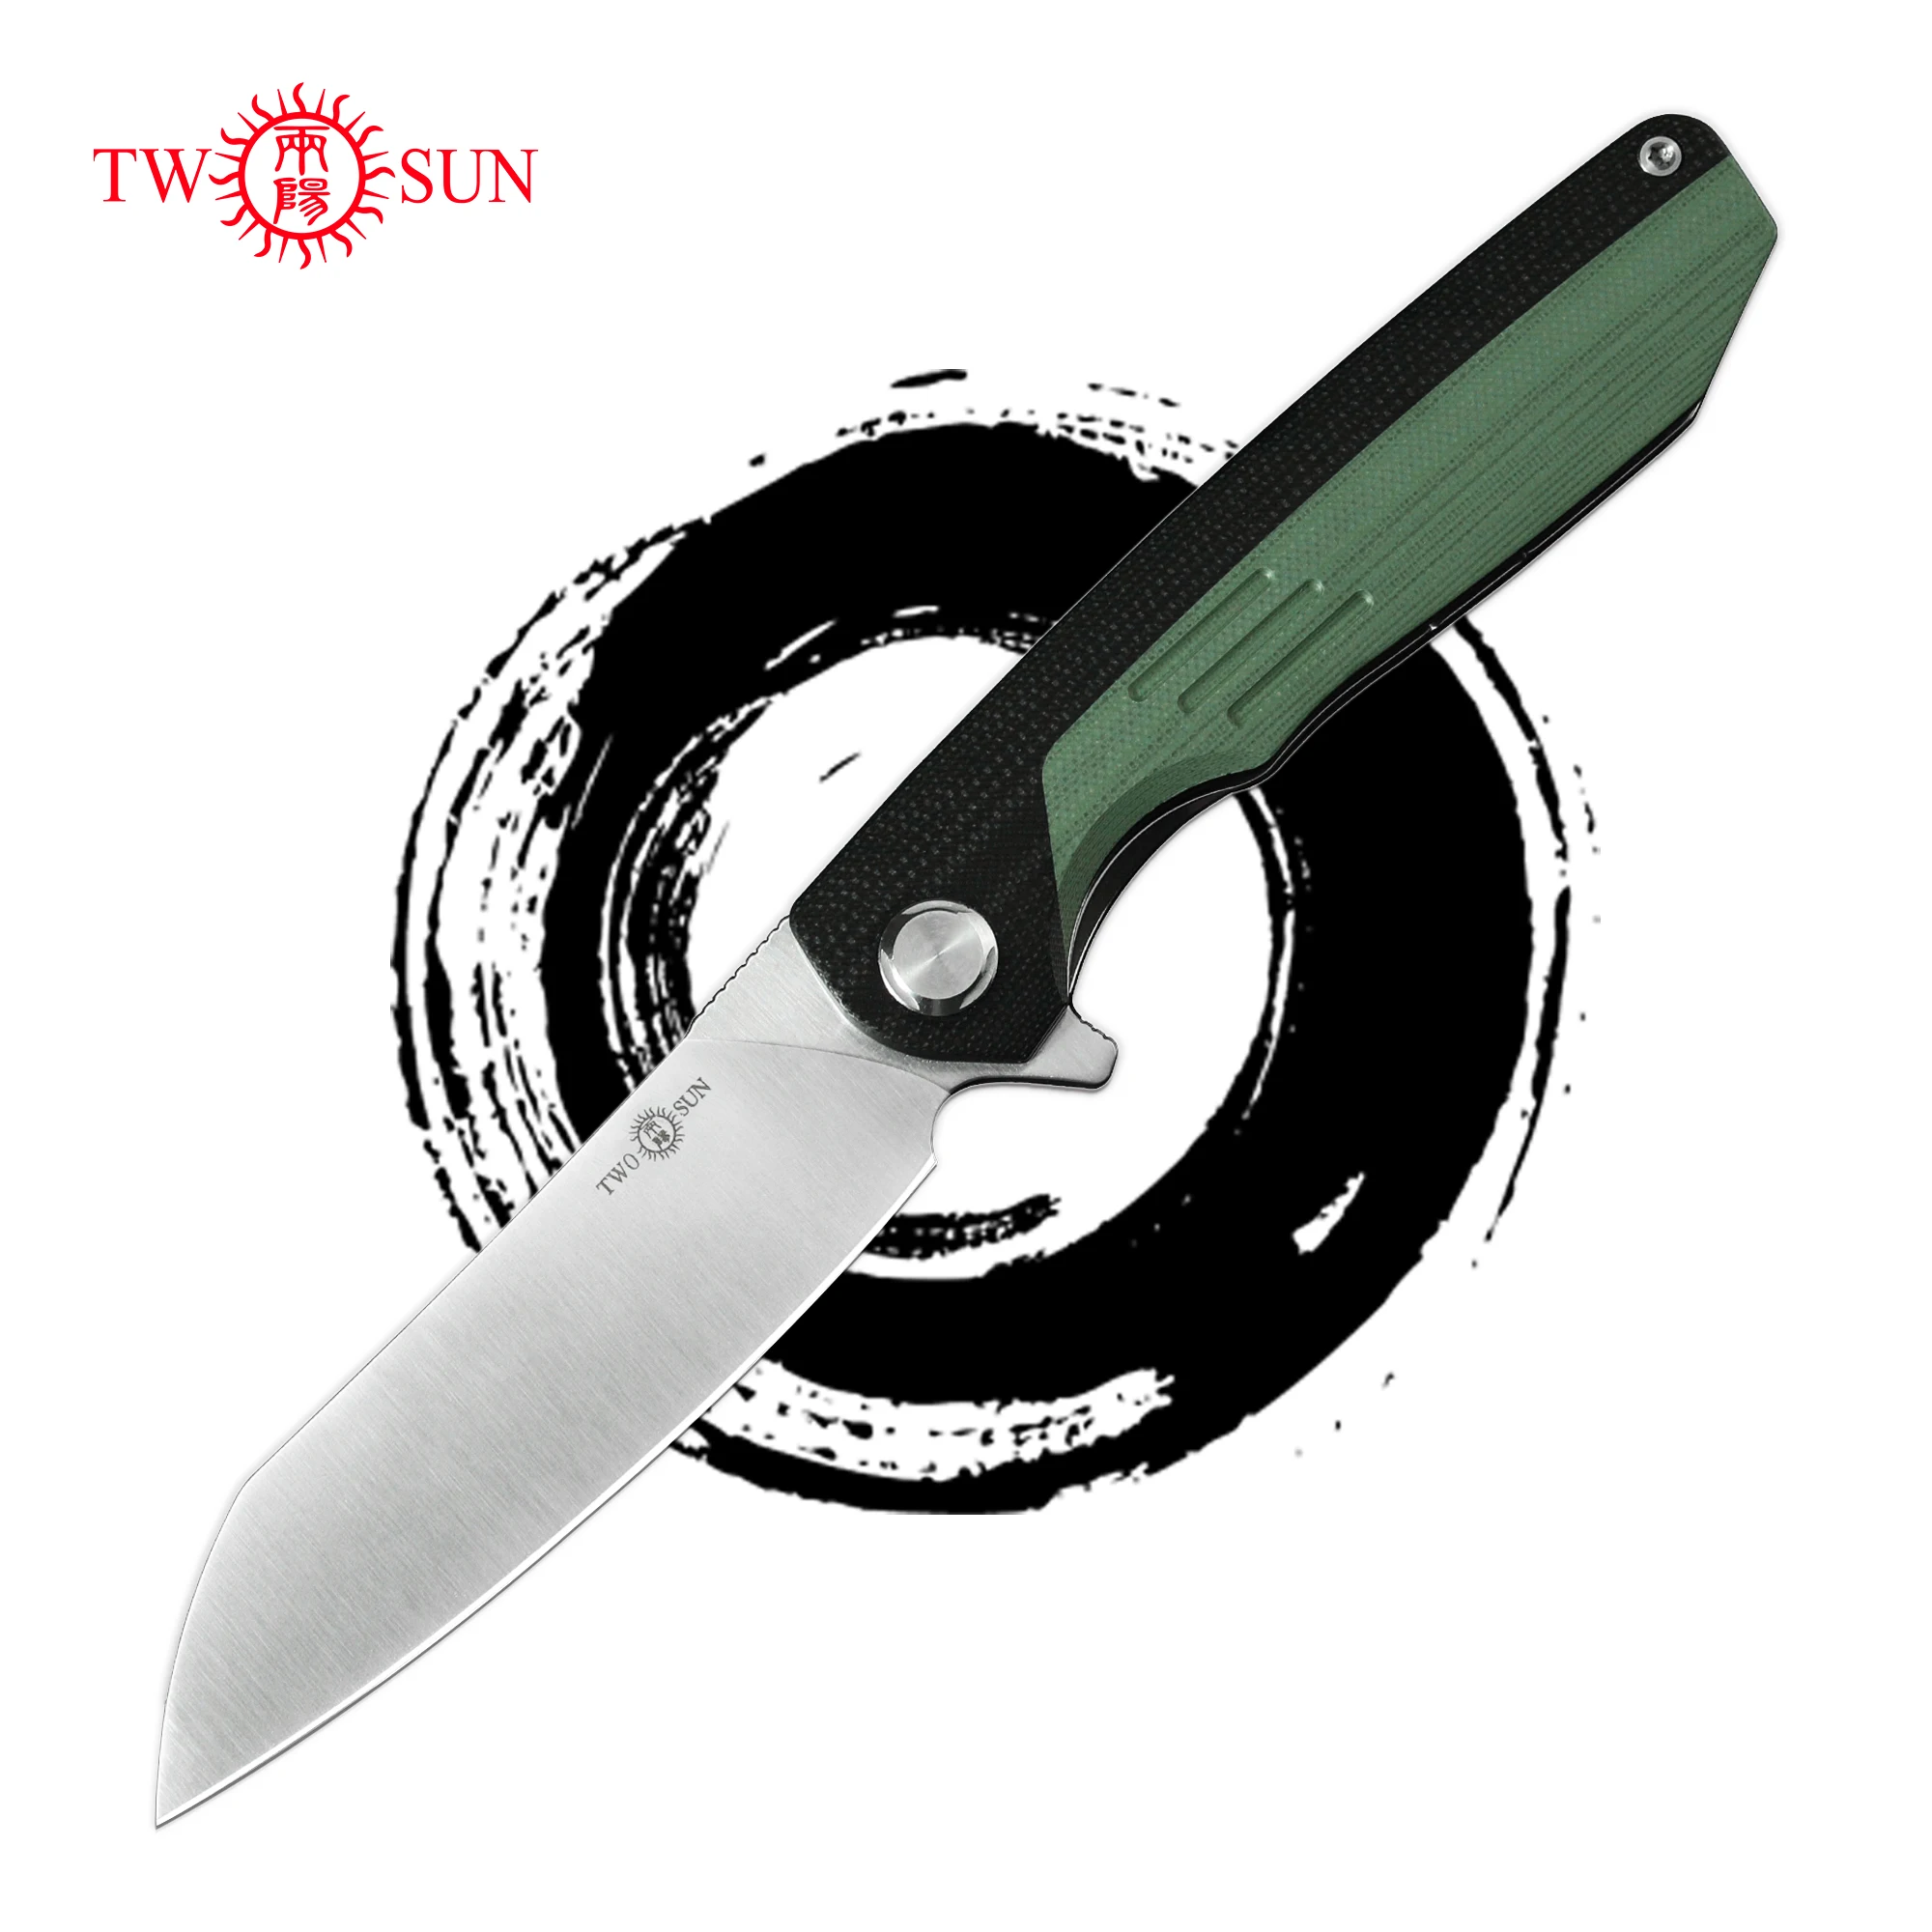 

TWOSUN TS501 Folding Knife G10 Handle D2 Steel Blade Camping Survival Outdoor Hunting EDC Pocket Tool for Men Self defense